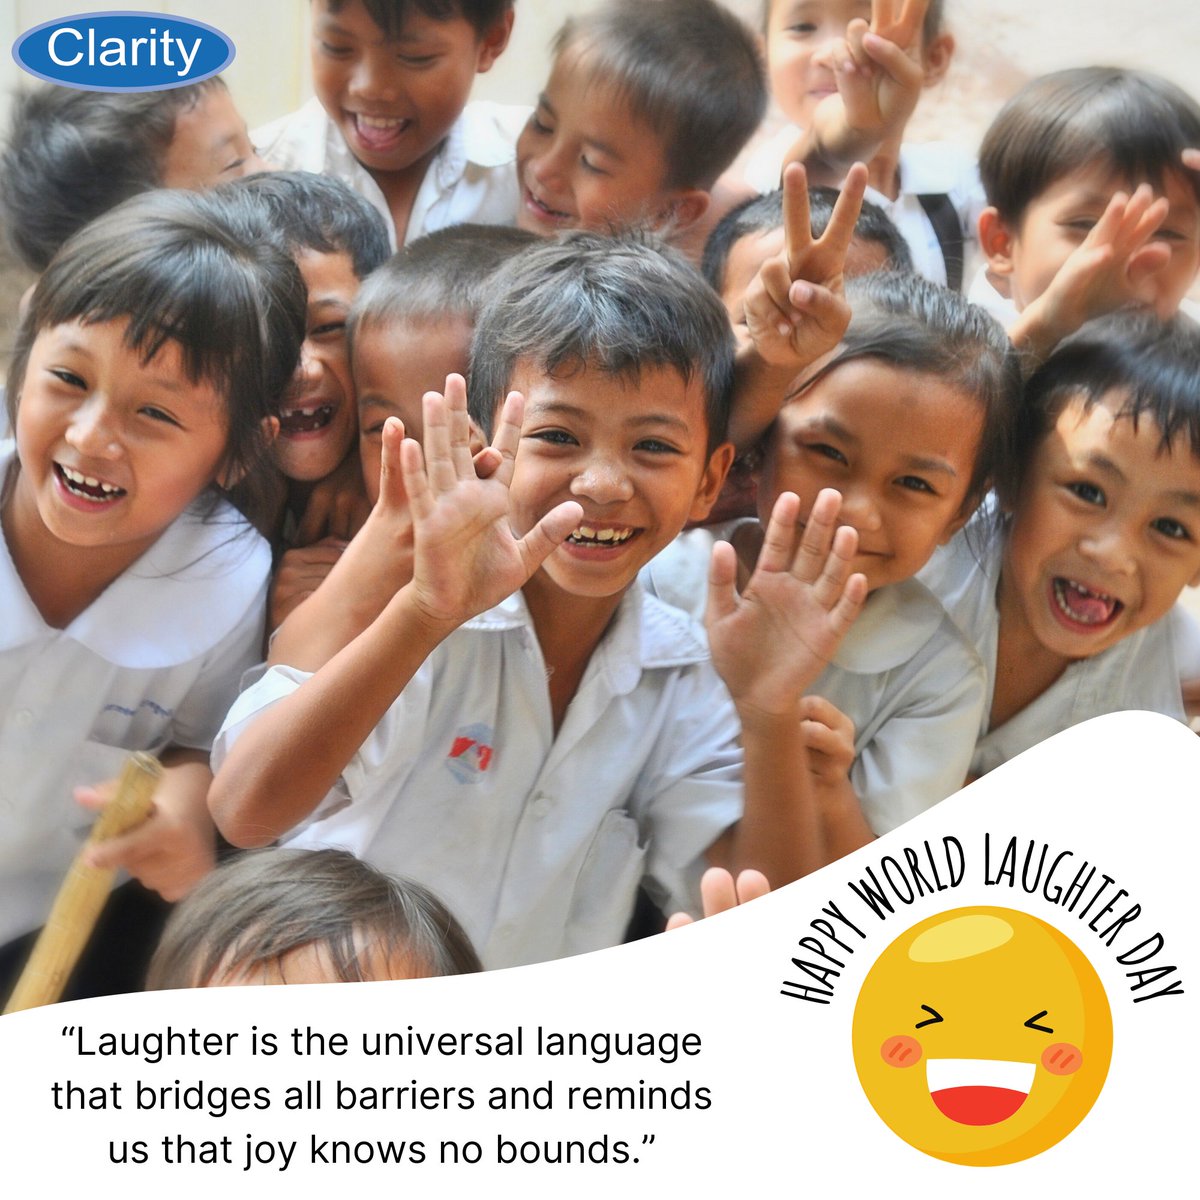 Laughter is the best medicine. This #WorldLaughterDay, let's spread joy and brighten the world, one hearty laugh at a time! 😄🌟
#ClarityMedical #HealthisWealth #HappyMindHappyBody #peace #GlobalHealth